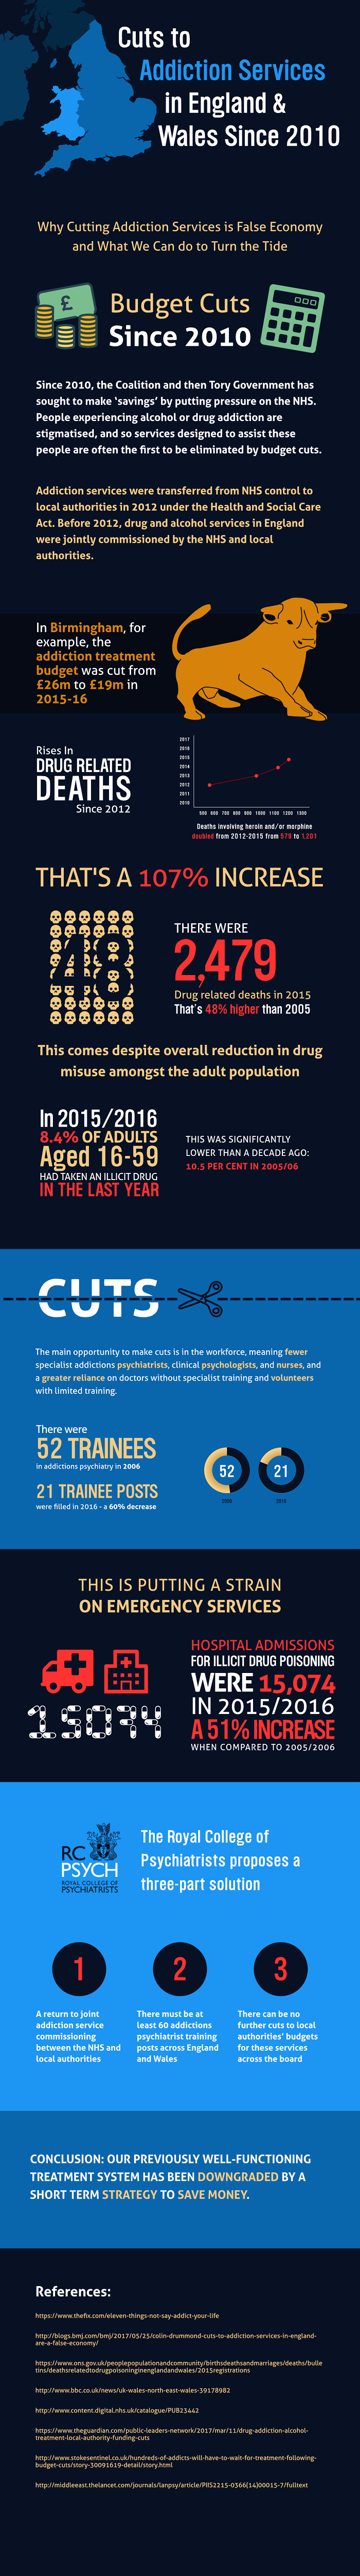 Cuts to Addiction Services Since 2010 [INFOGRAPHIC] | Cassiobury Court